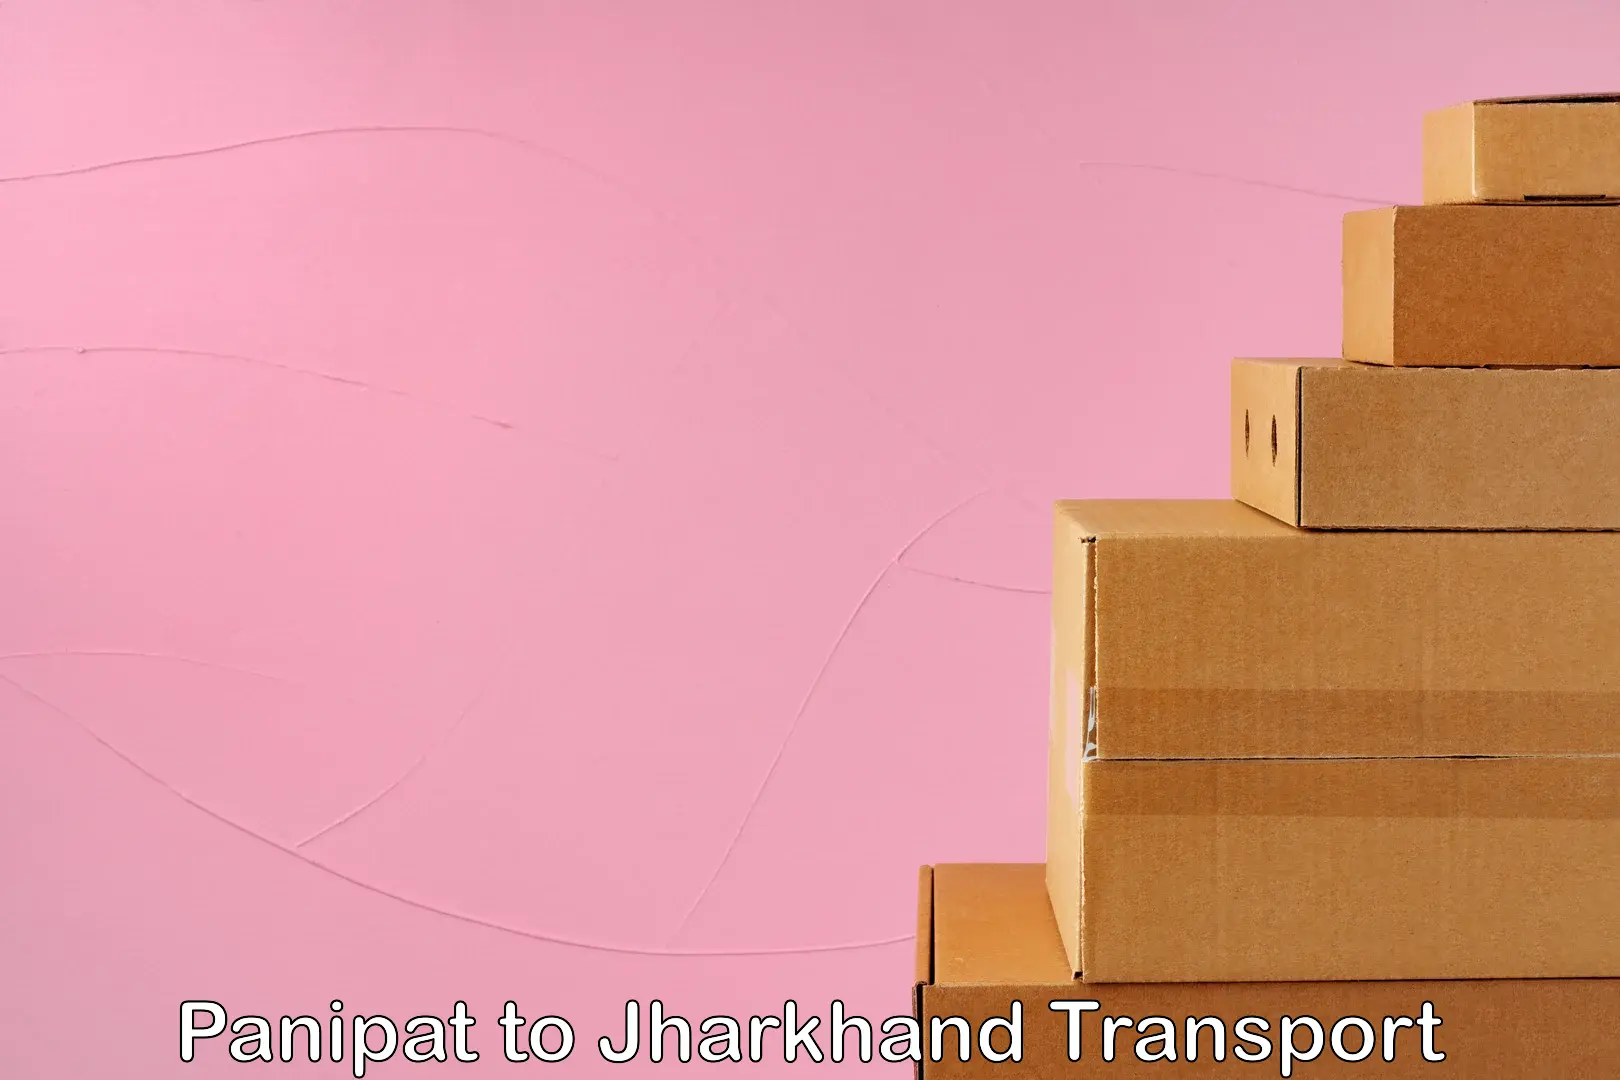 Container transport service Panipat to Jharkhand